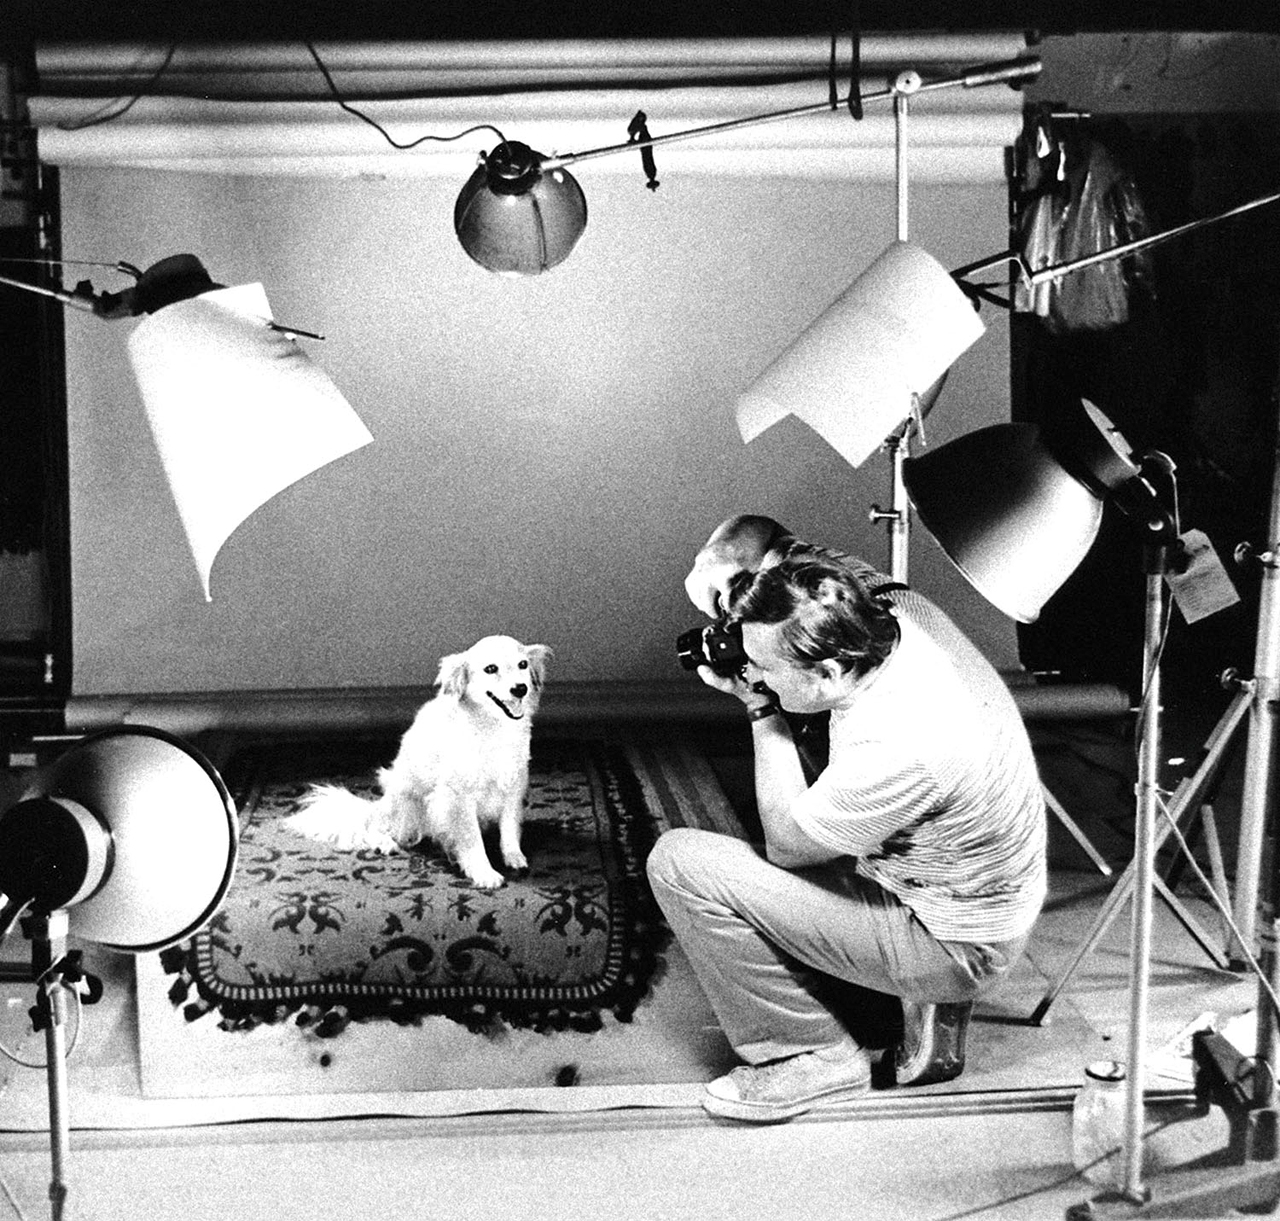 Chandoha in the studio with his rescue dog, 1975